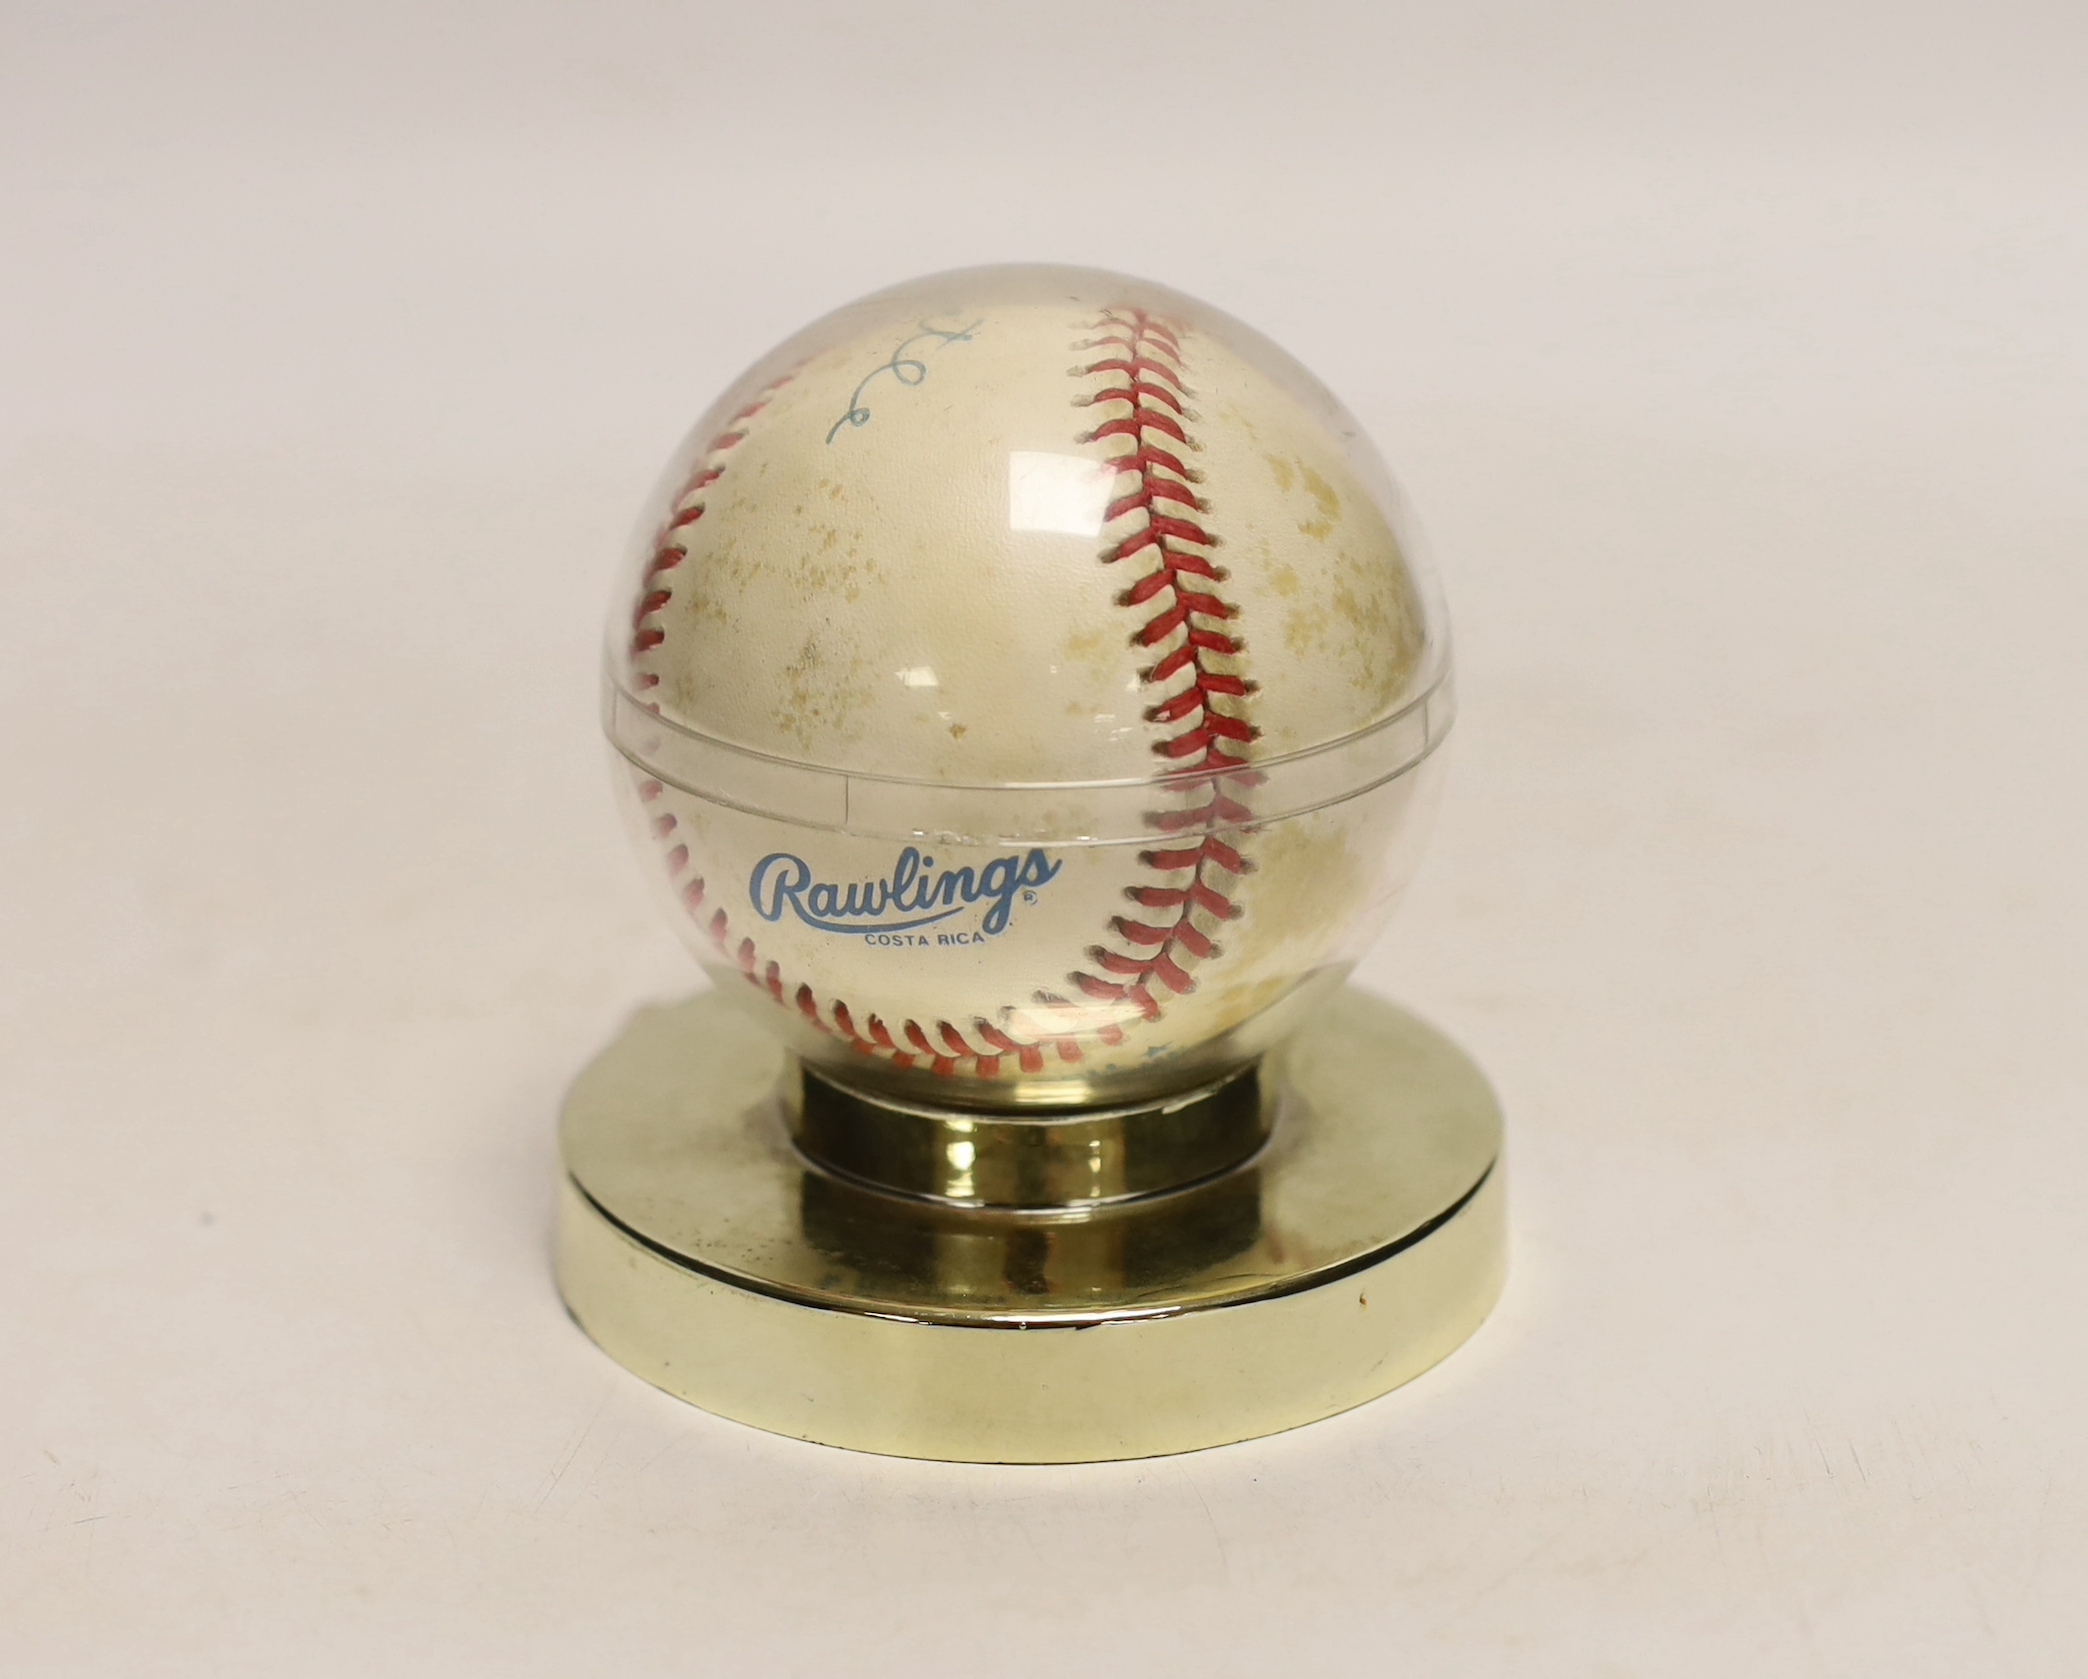 A Rawlings Costa Rica baseball autographed by Mickey Mantler, housed in a display case